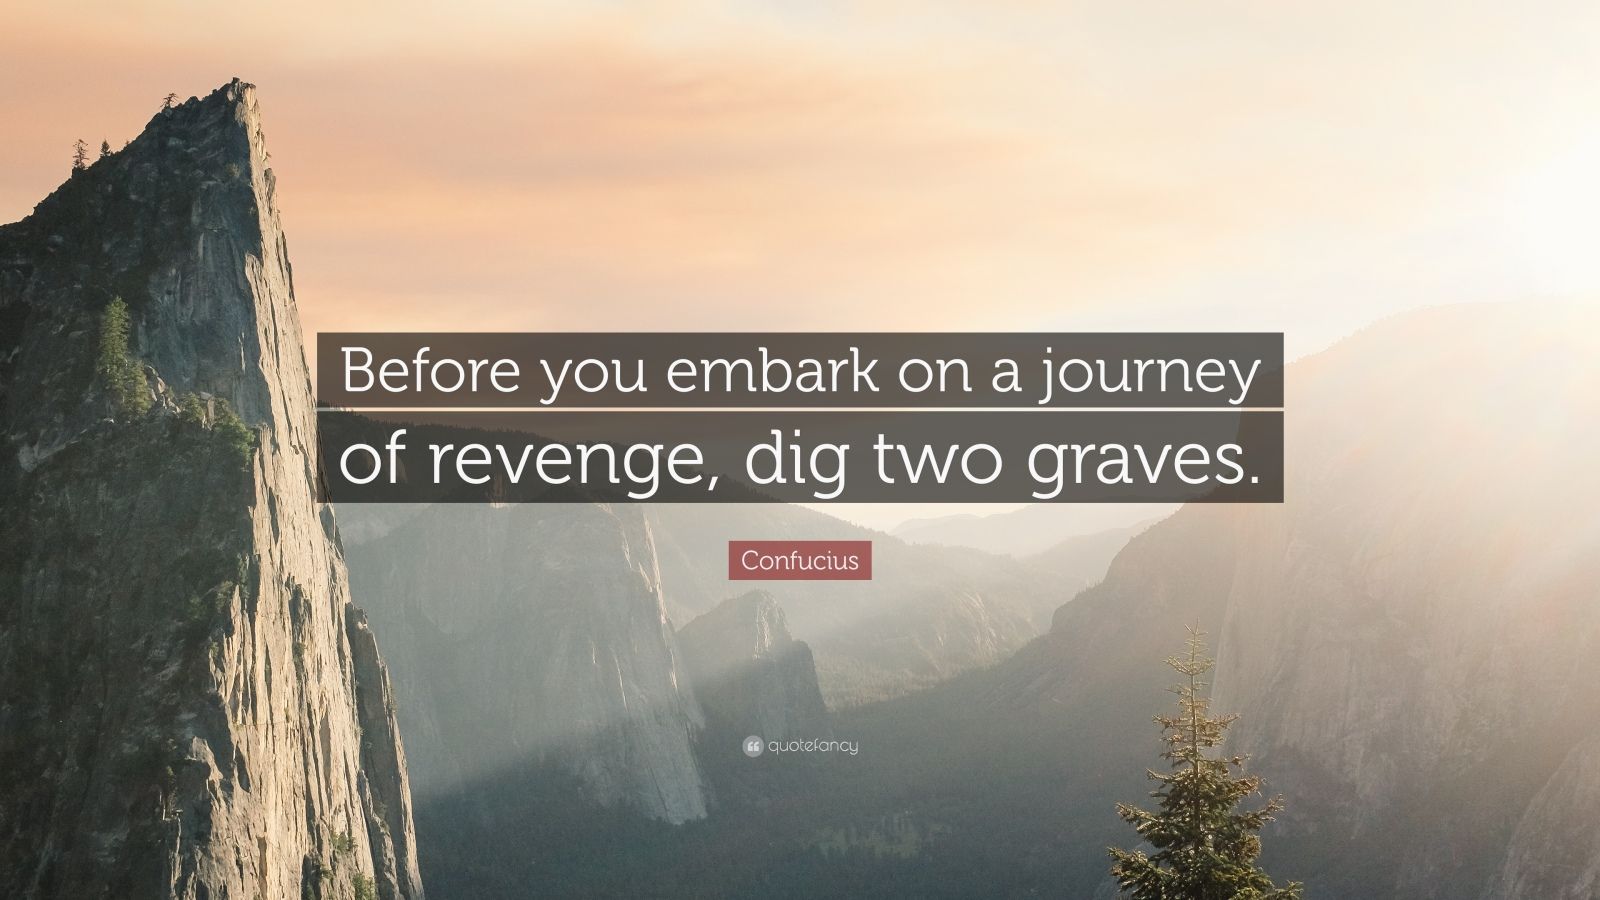 confucius quote: "before you embark on a journey of revenge, dig